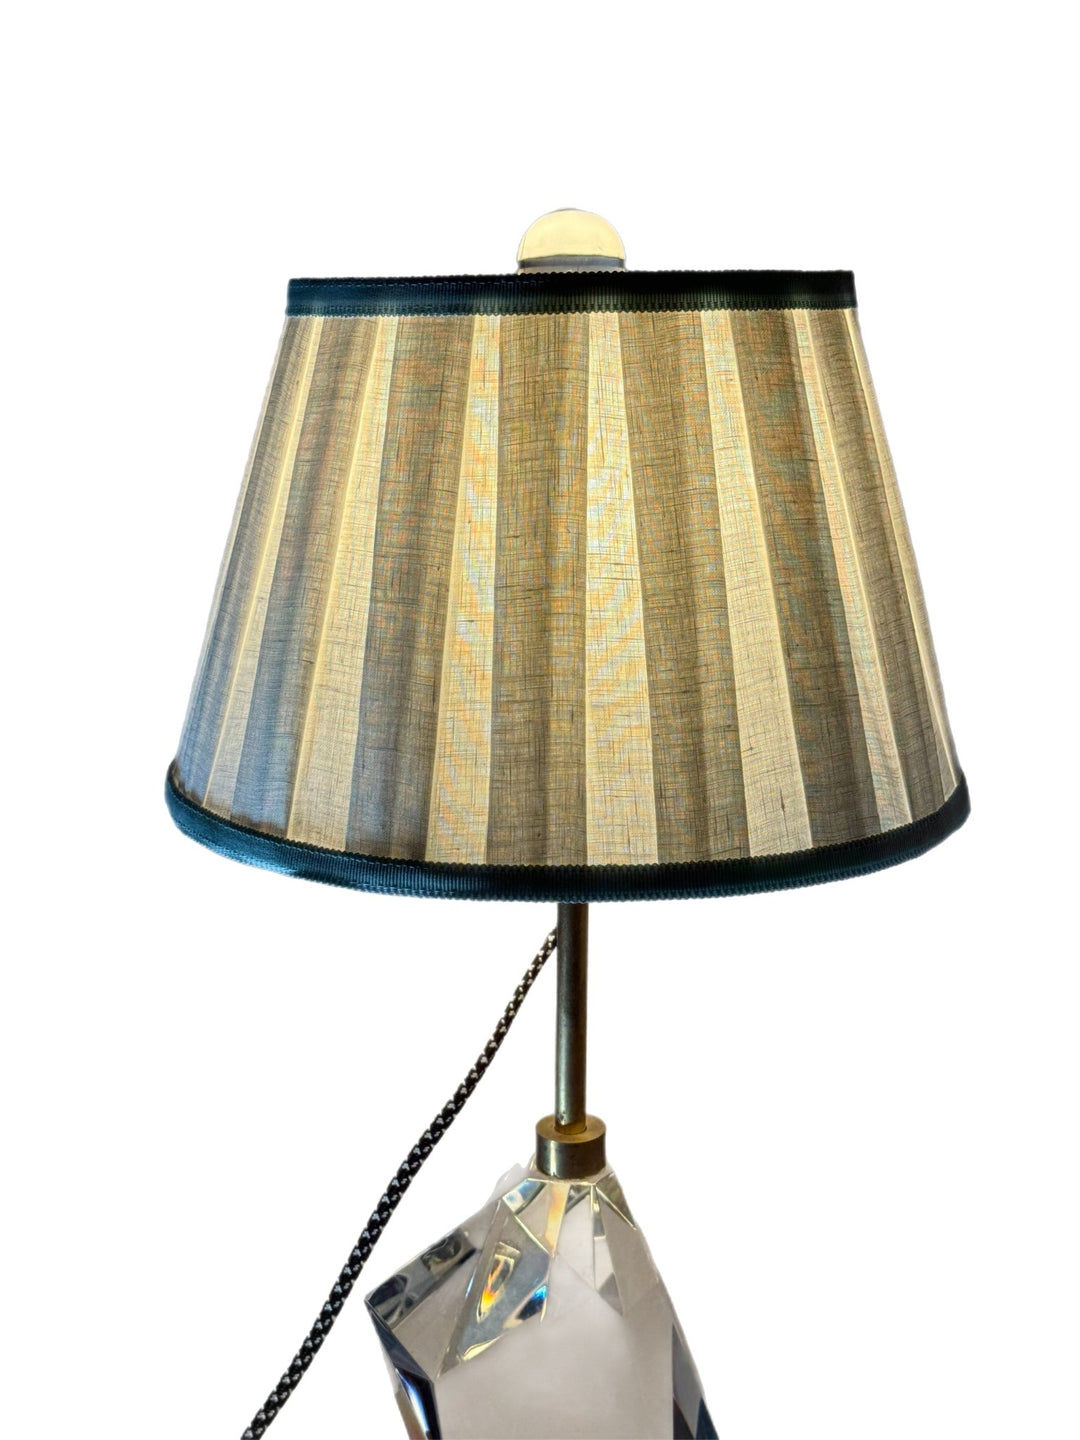 12" Box Pleat Linen Pembroke Lamp Shades with Samuel and Son's Sea Spray trim top and bottom - Lux Lamp Shades